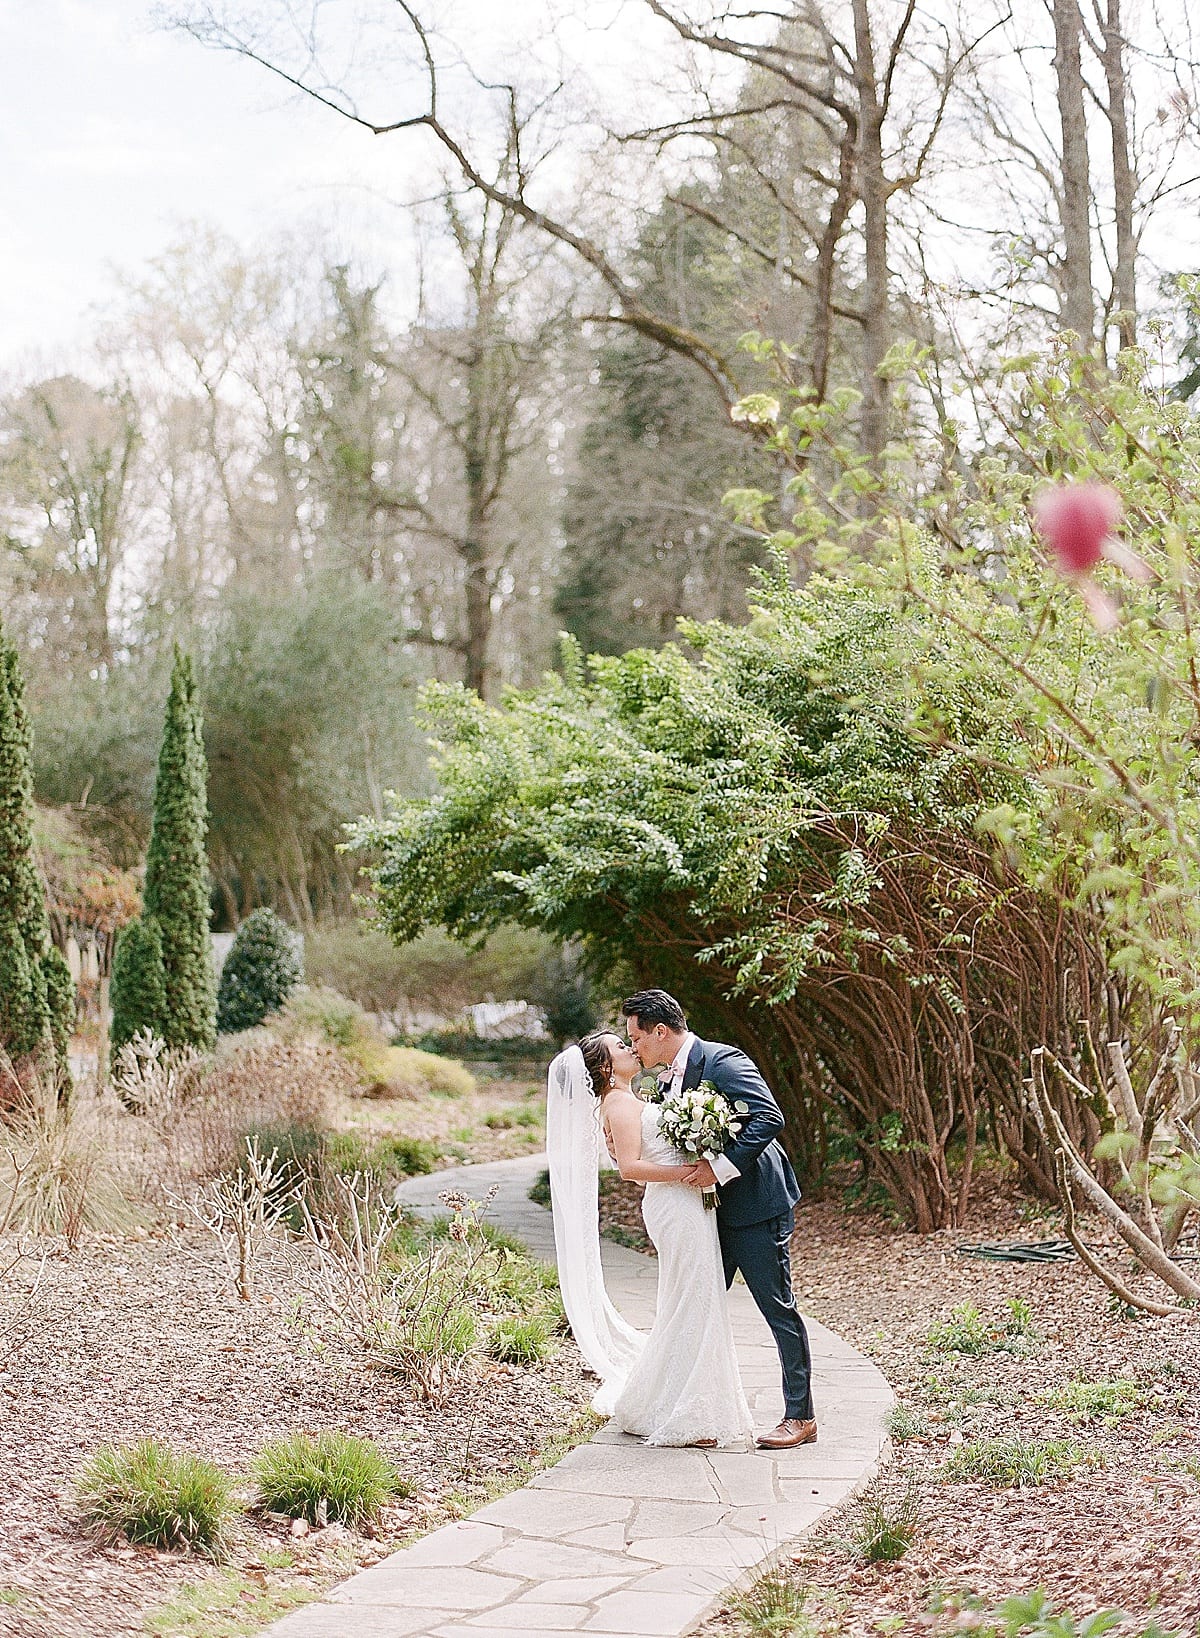 Cator Woolford Gardens Bride and Groom Kissing In Garden Photo